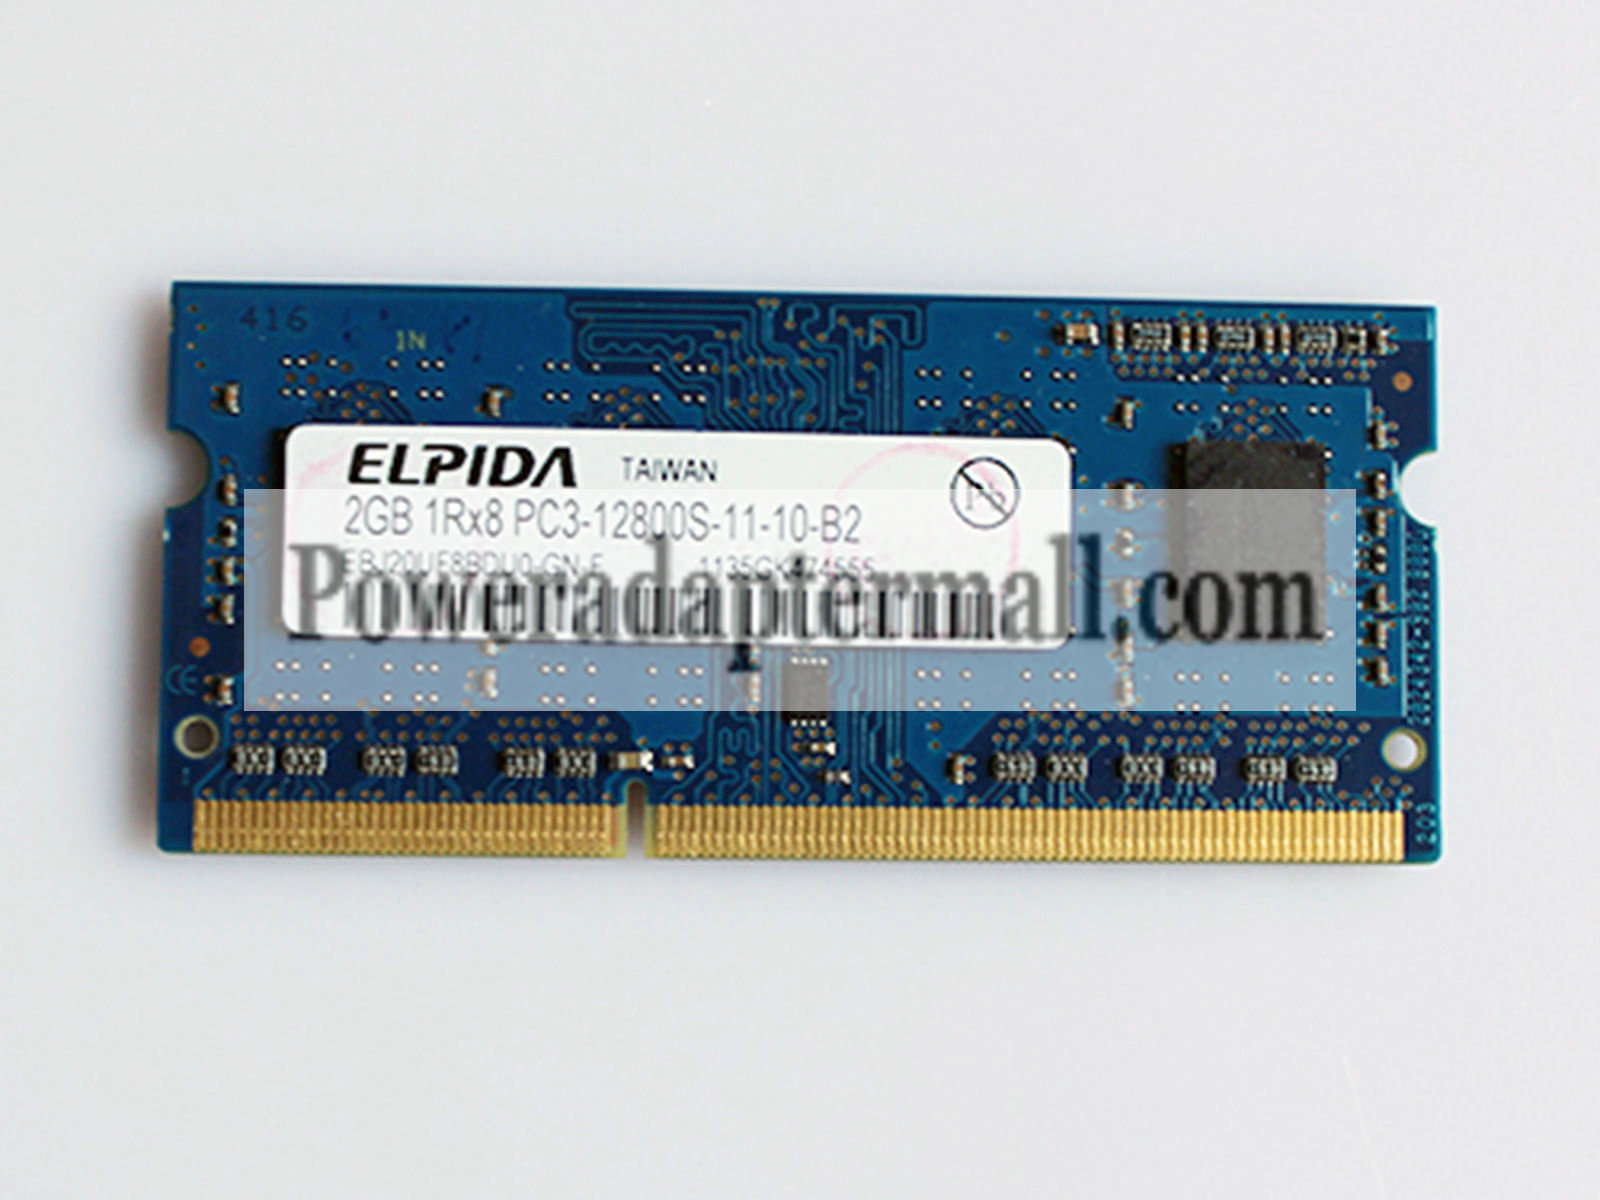 ELPIDA PC3-12800S 1600MHz 2GB DDR3 SO-DIMM Laptop Memory for Ace